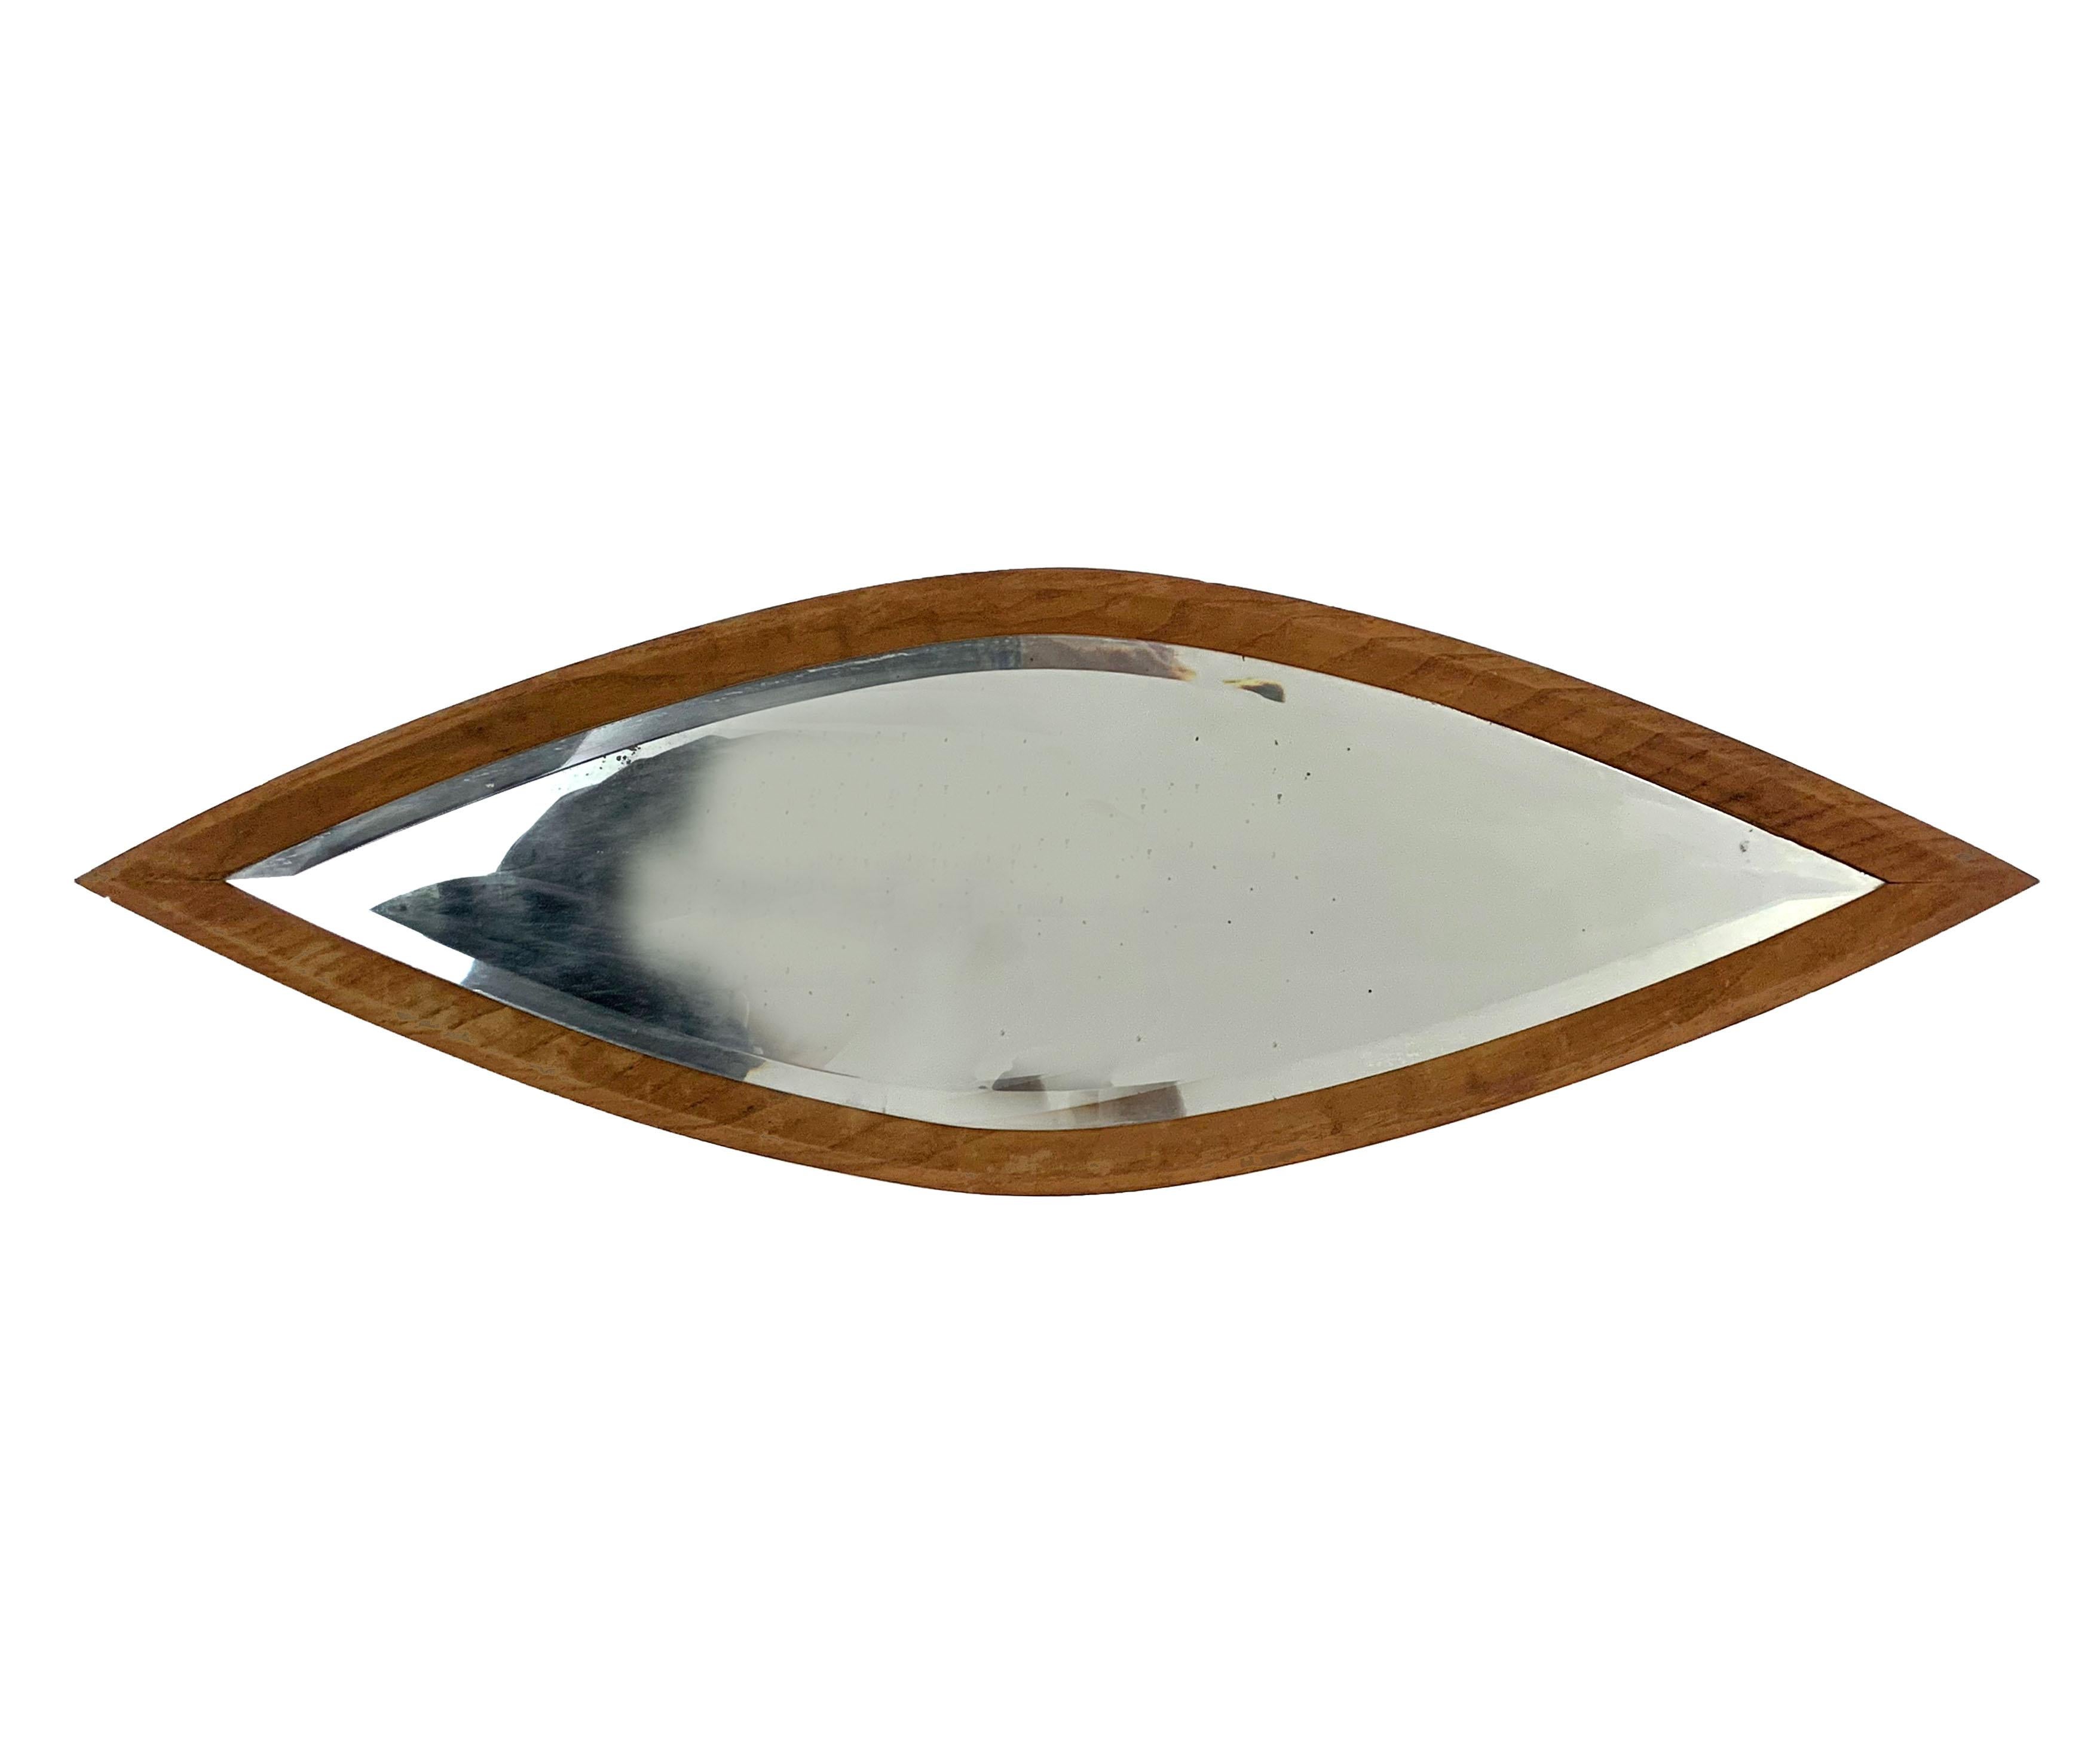 20th Century Oval Wall Mirror, Eye-Shaped, Wood Frame, 1950s Italy Mid-Century Modern For Sale